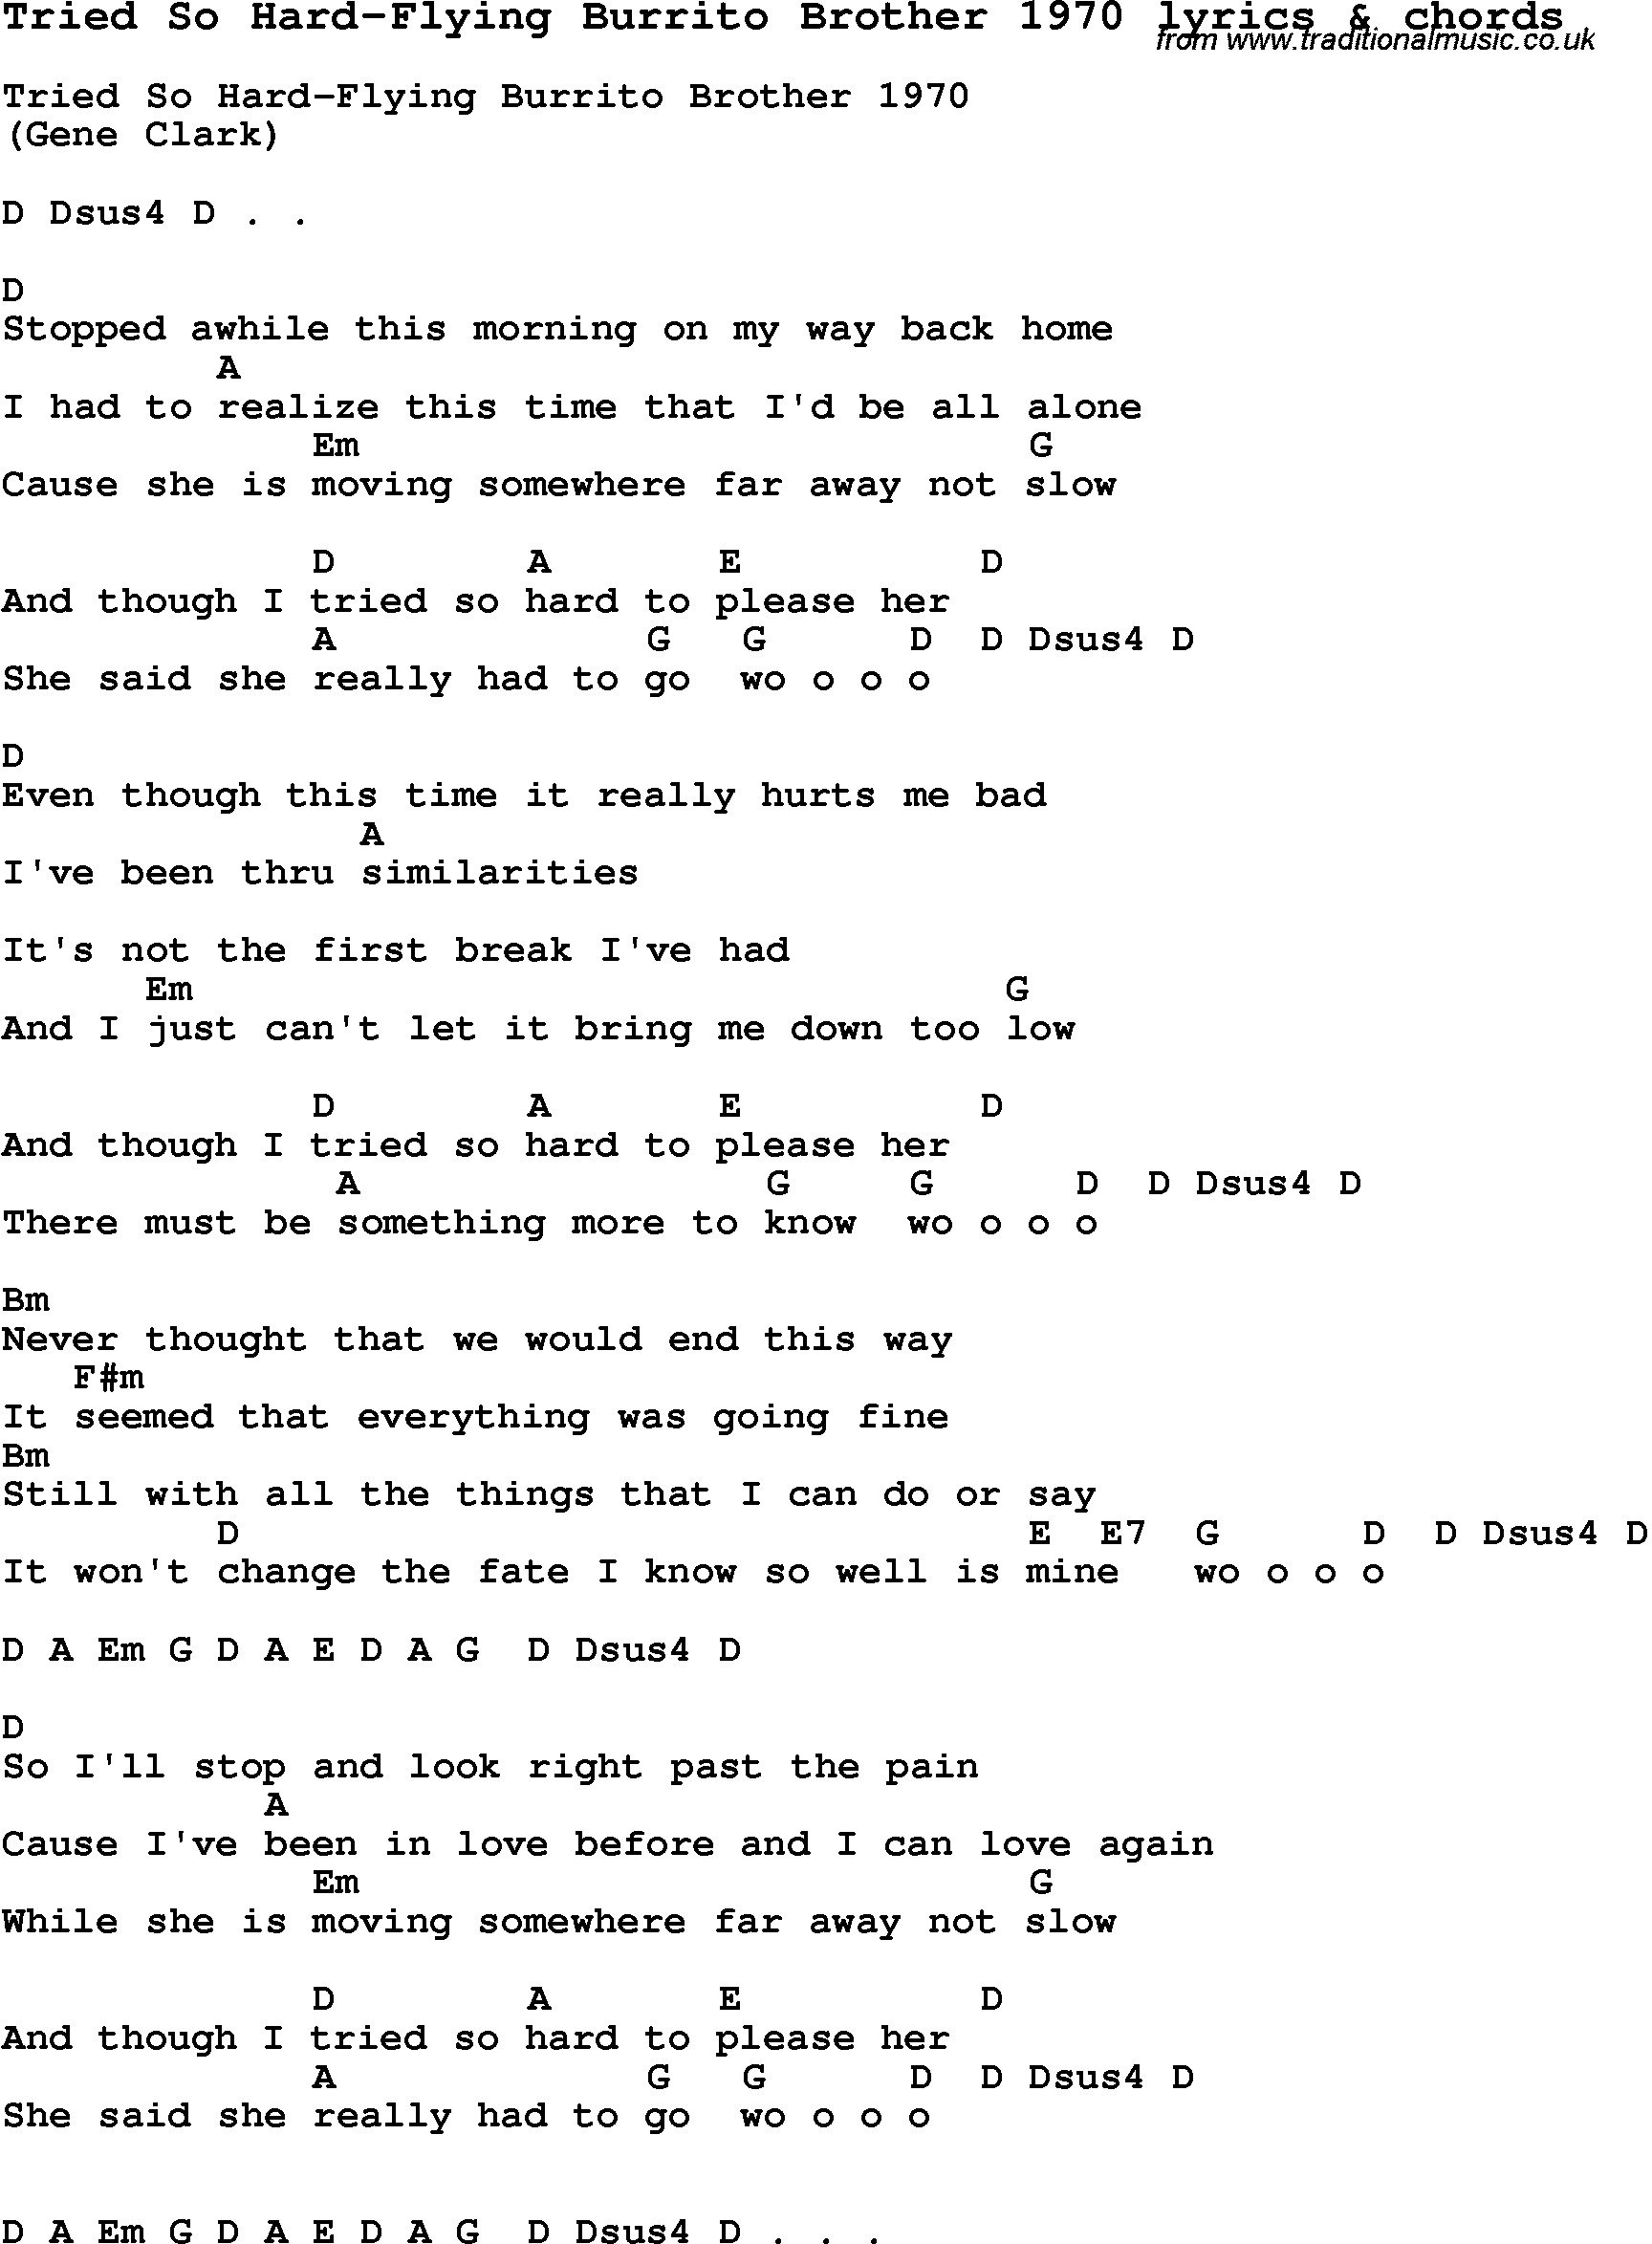 Love Song Lyrics for: Tried So Hard-Flying Burrito Brother 1970 with chords for Ukulele, Guitar Banjo etc.